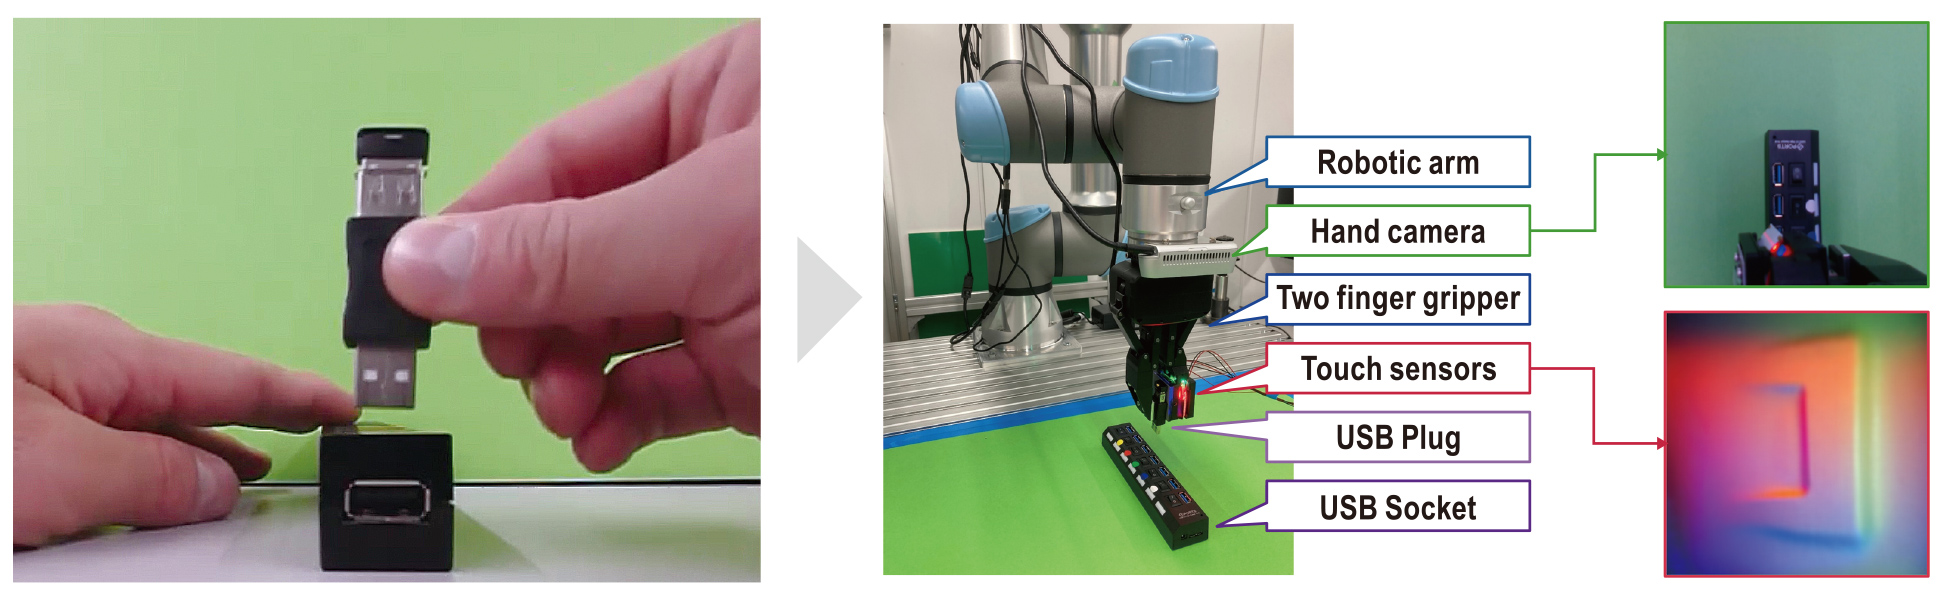 The robot arm grasps a USB plug, recognizes a USB socket on a table and tries to insert it.